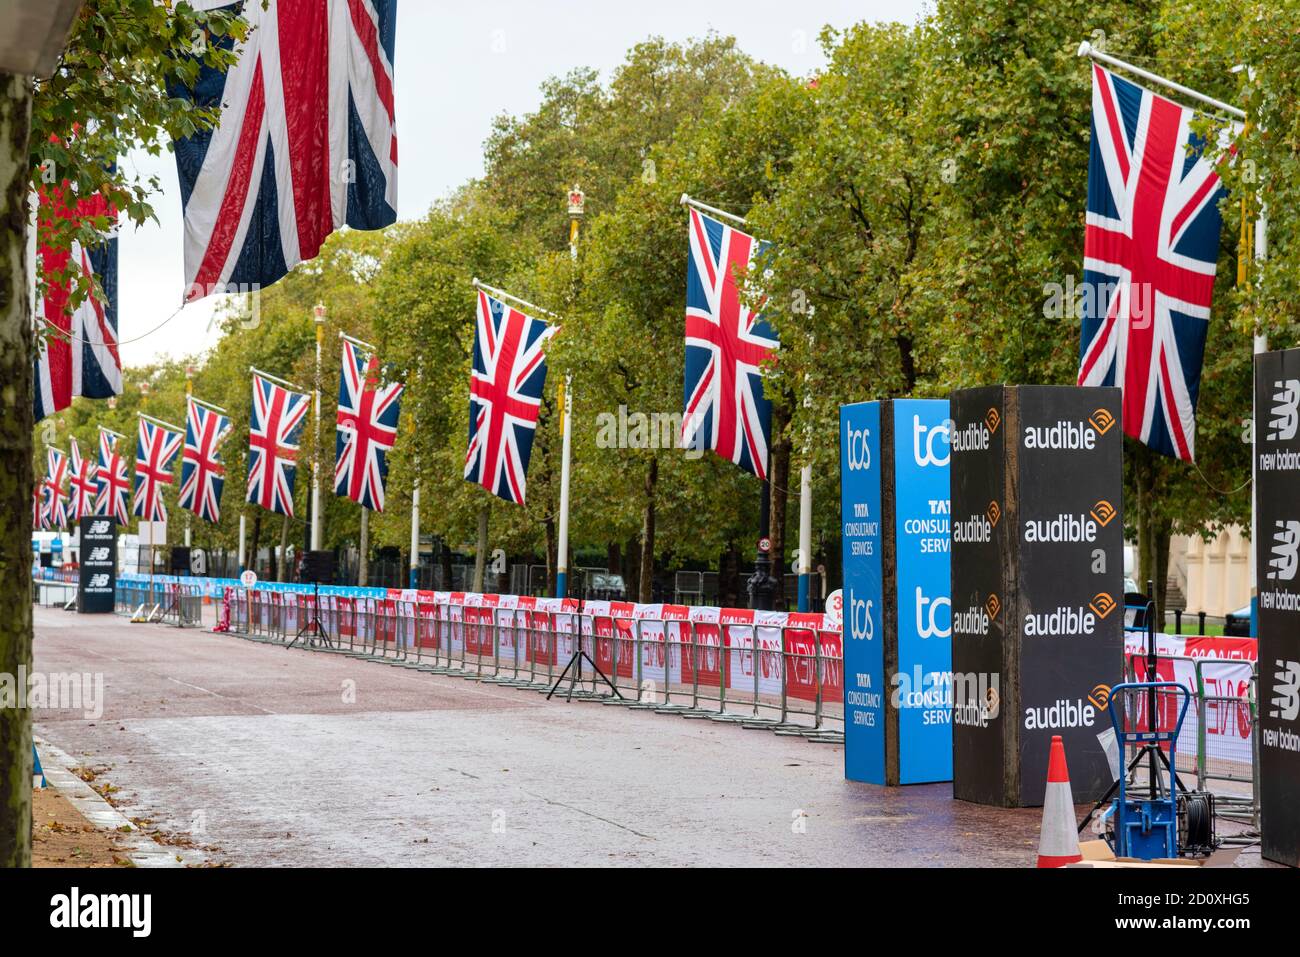 A view of the route in The Mall for the 40th London Marathon.Only Elite runners will run the course this year with everyone else taking part in a ‘virtual’ marathon. The race will take place on a closed Bio-secure loop circuit around St James’s Park in central London in The Mall, Birdcage Walk & Horse Guards parade. Stock Photo